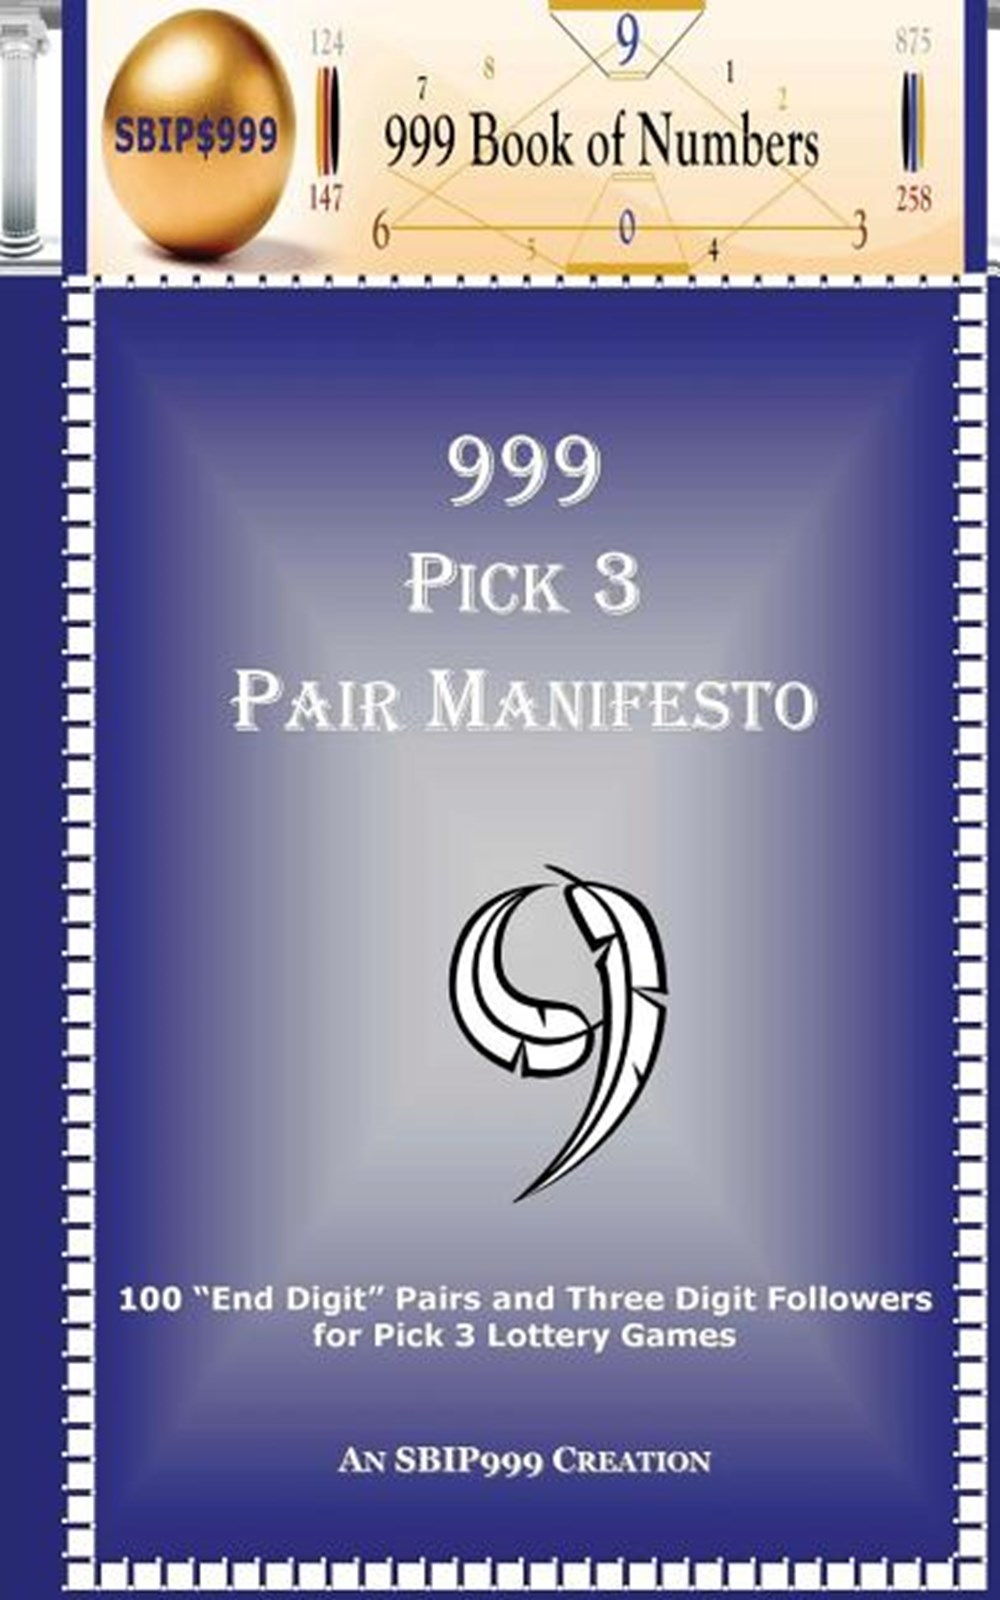 999 Pick 3 Pair Manifesto: 100 End Digit Pairs and Three Digit Followers for Pick 3 Lottery Games